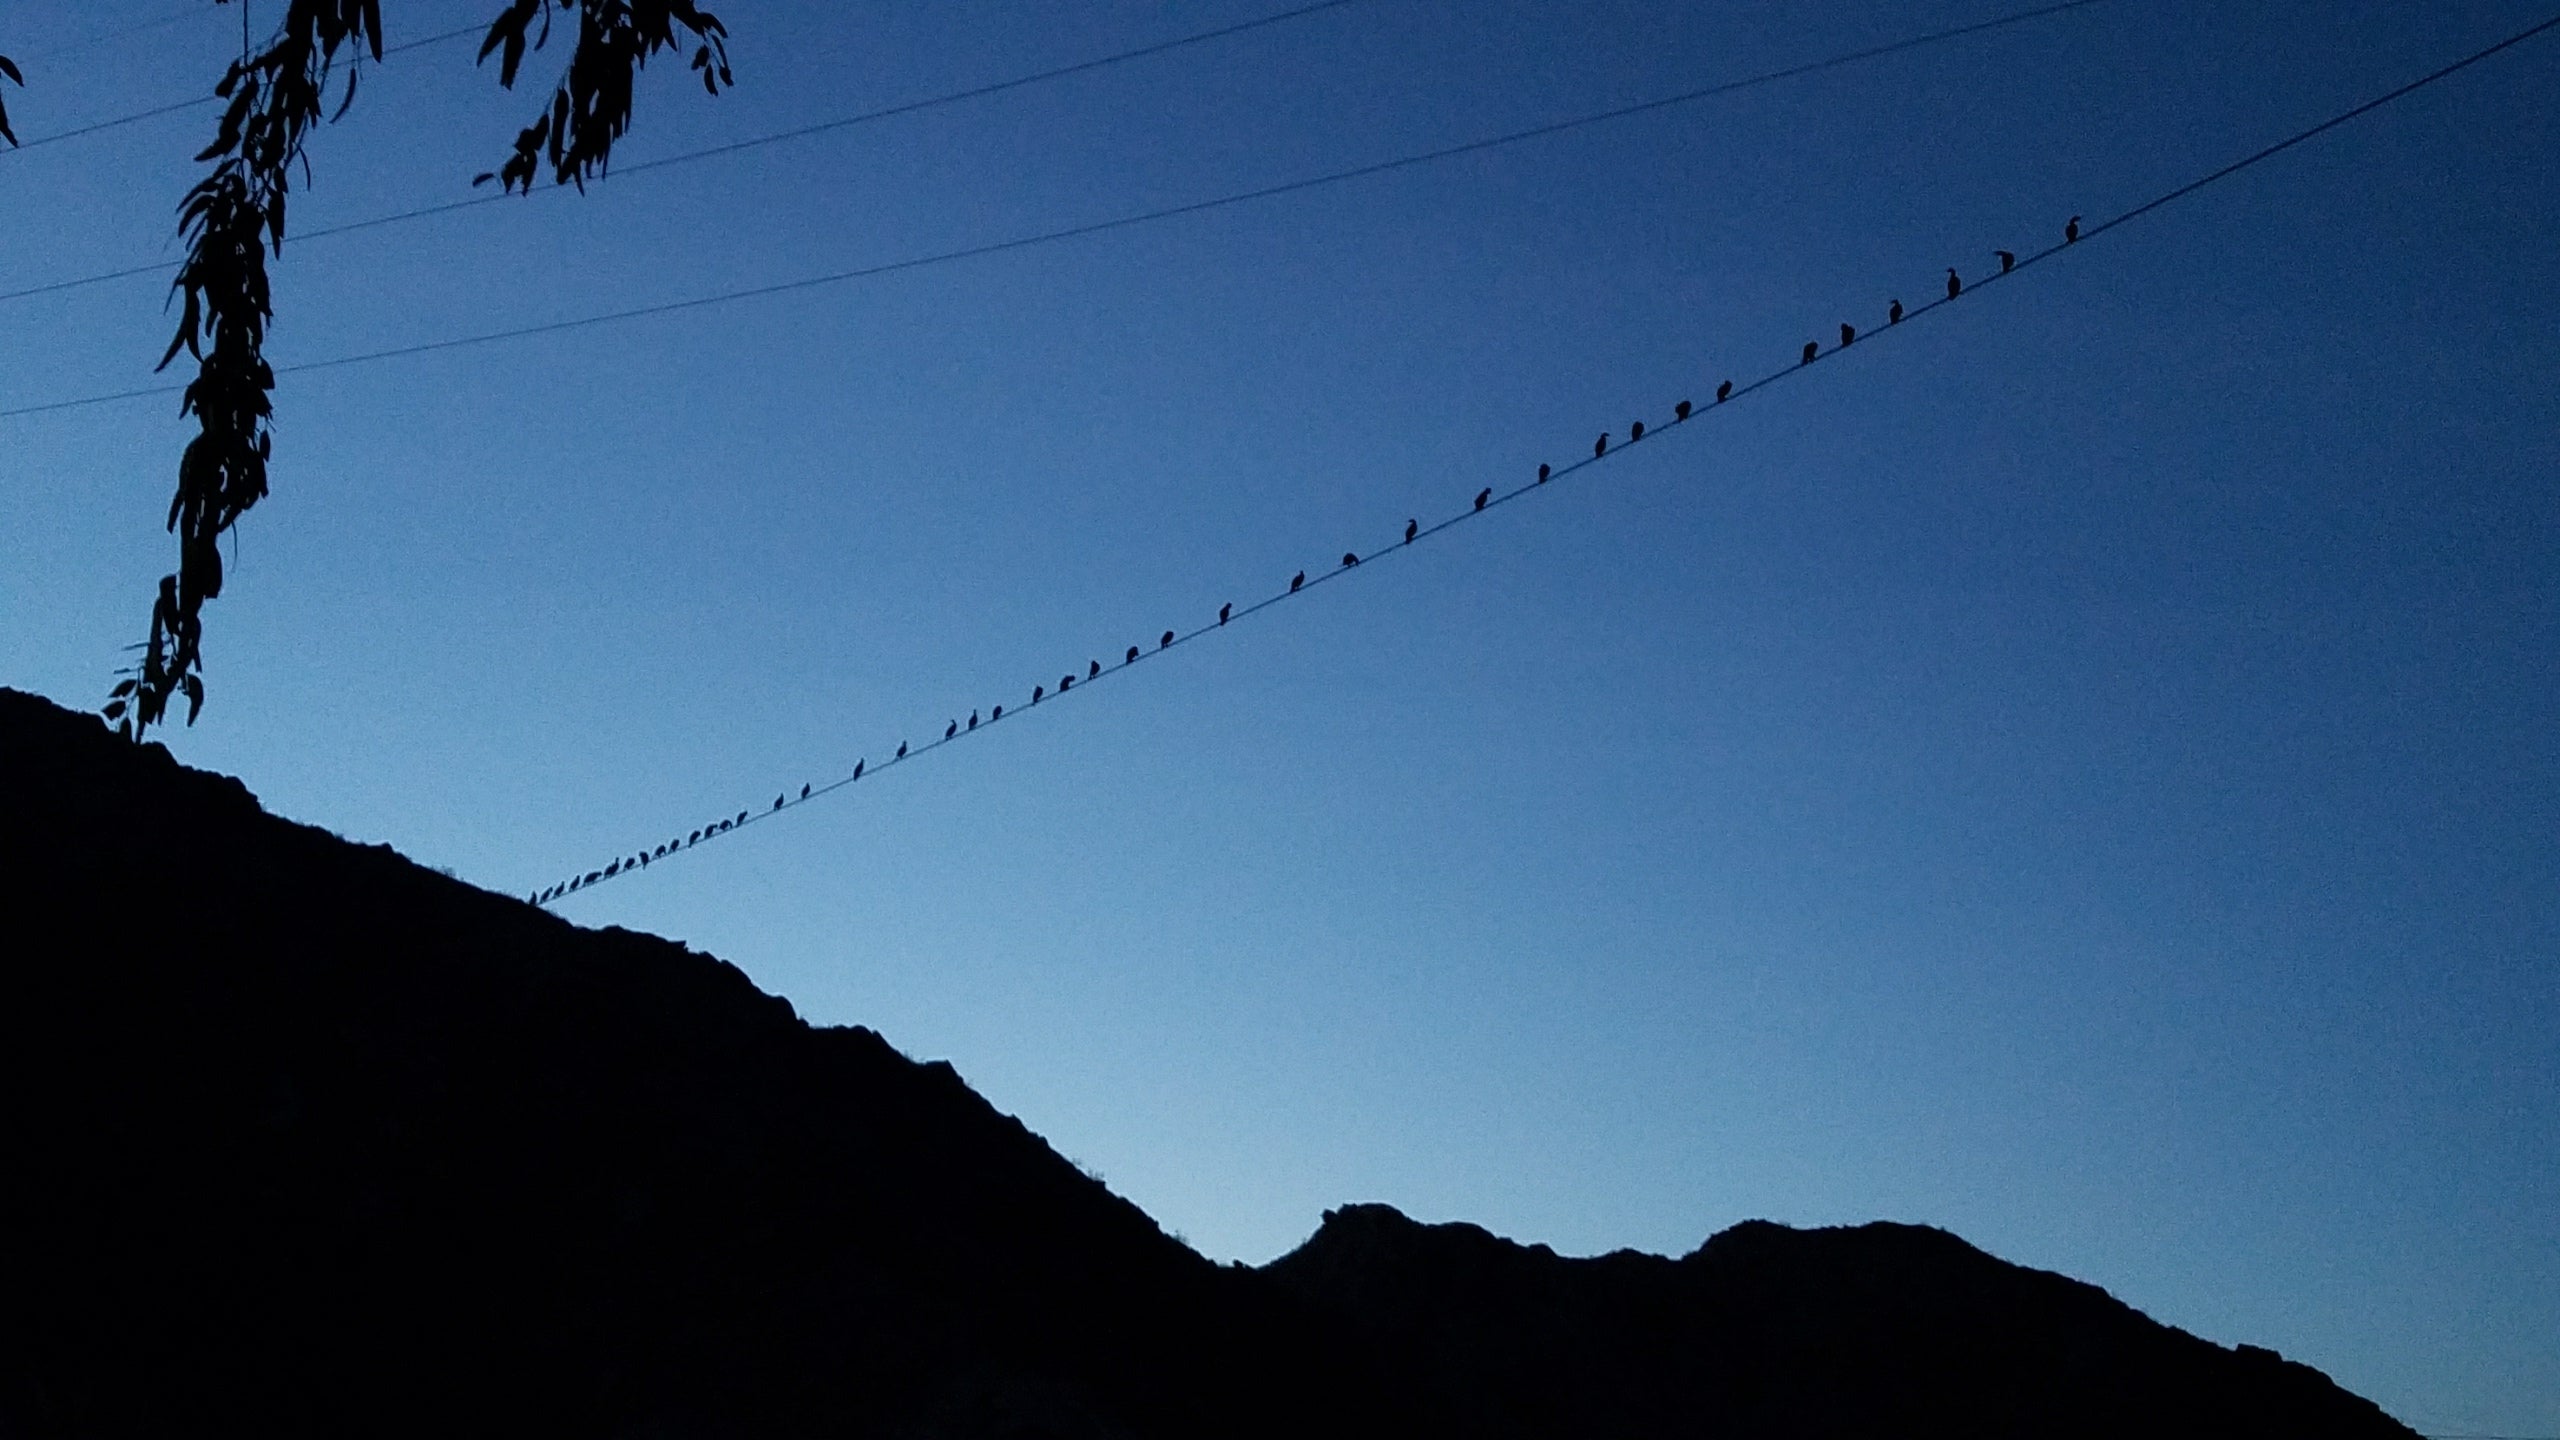 Water birds roosting on a high wire (fun to watch them compete for space) 